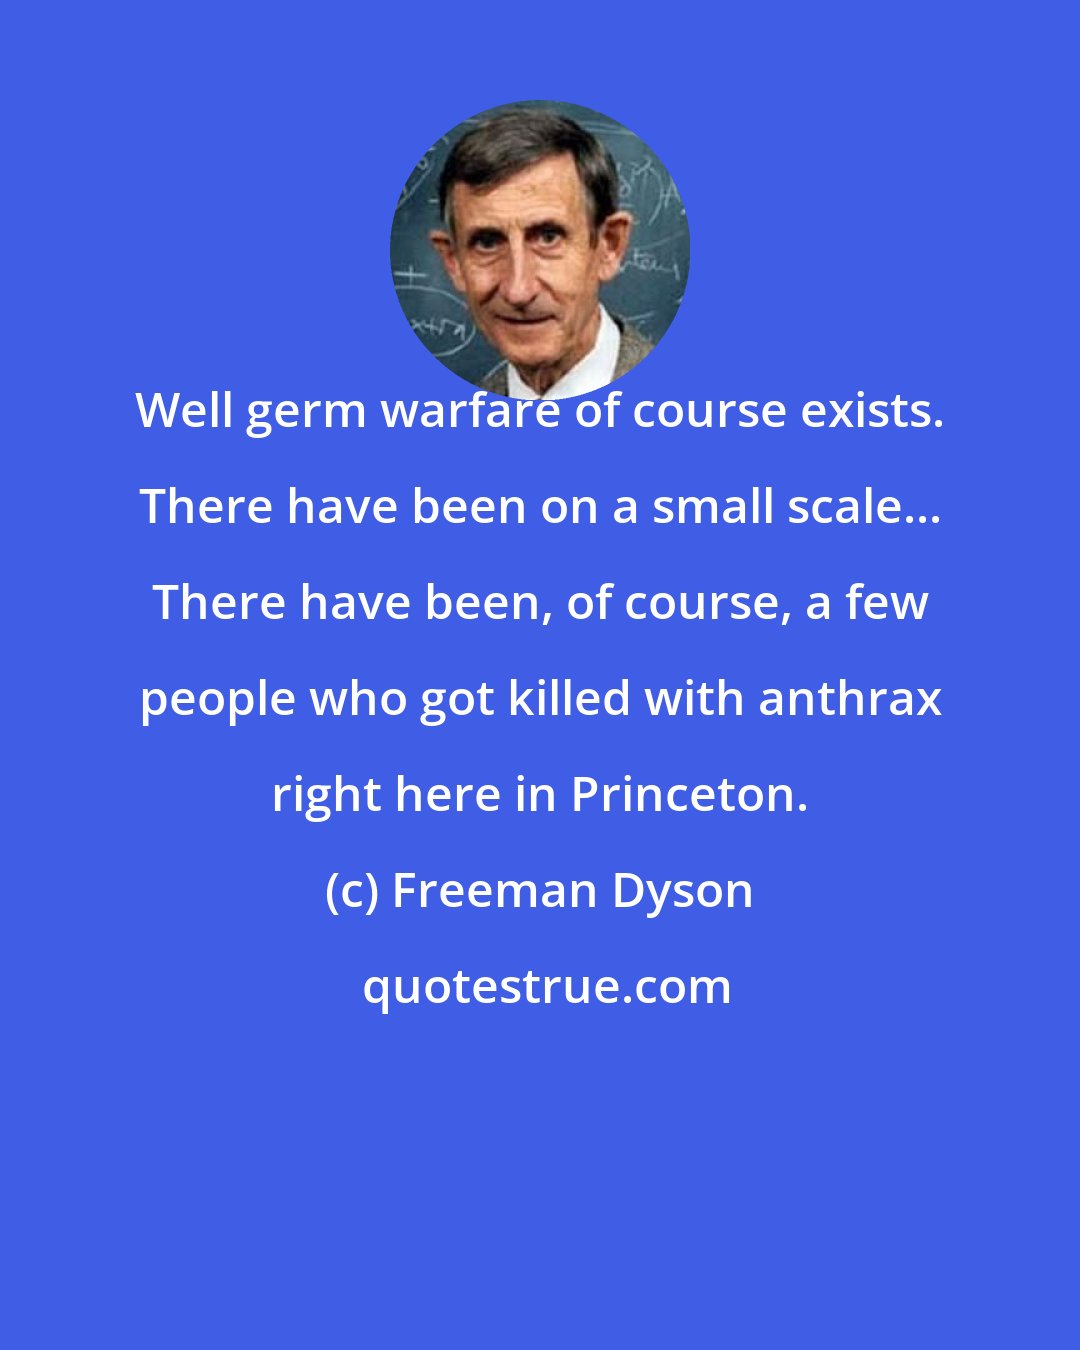 Freeman Dyson: Well germ warfare of course exists. There have been on a small scale... There have been, of course, a few people who got killed with anthrax right here in Princeton.